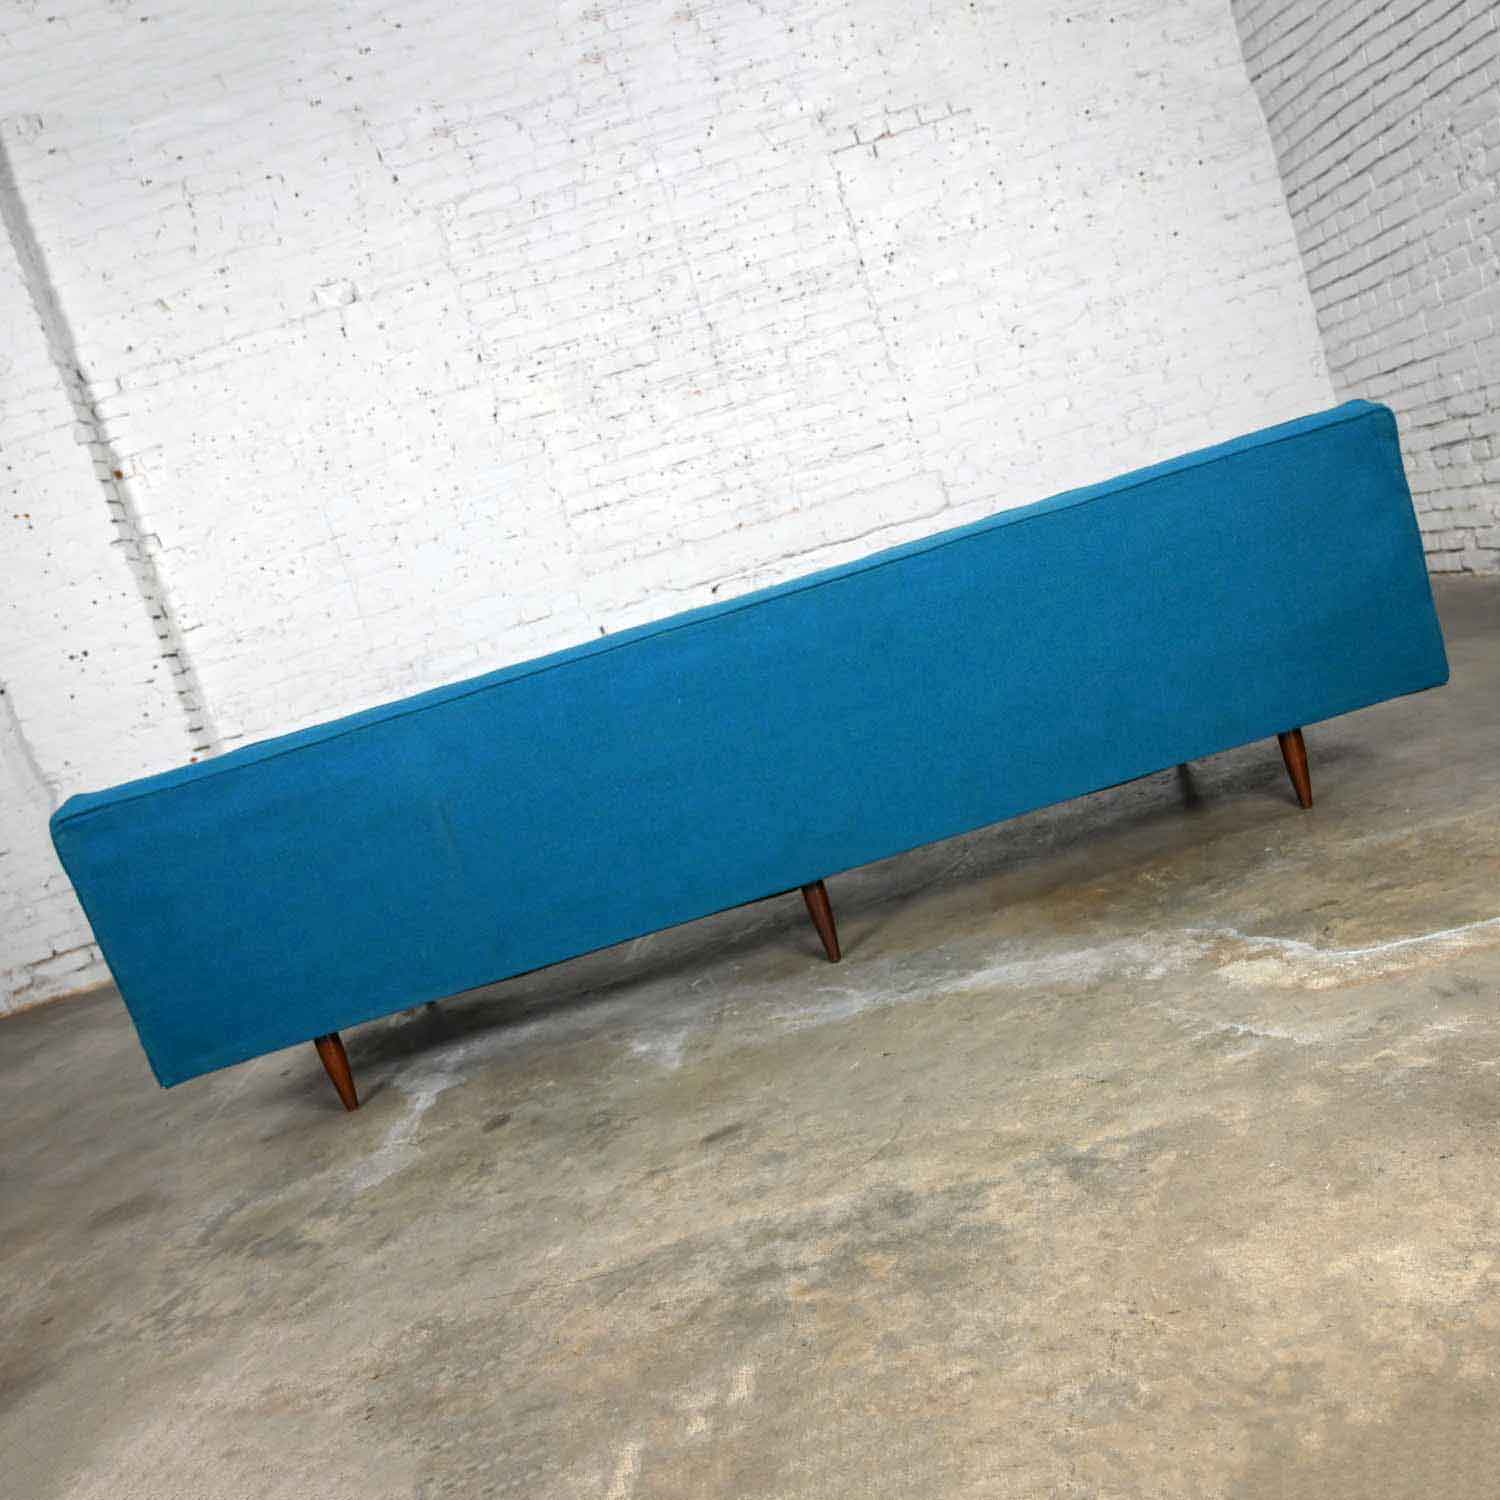 Vintage Mid-Century Modern Turquoise Lawson 4 Cushion Sofa Attributed to Milo Baughman for James Inc.